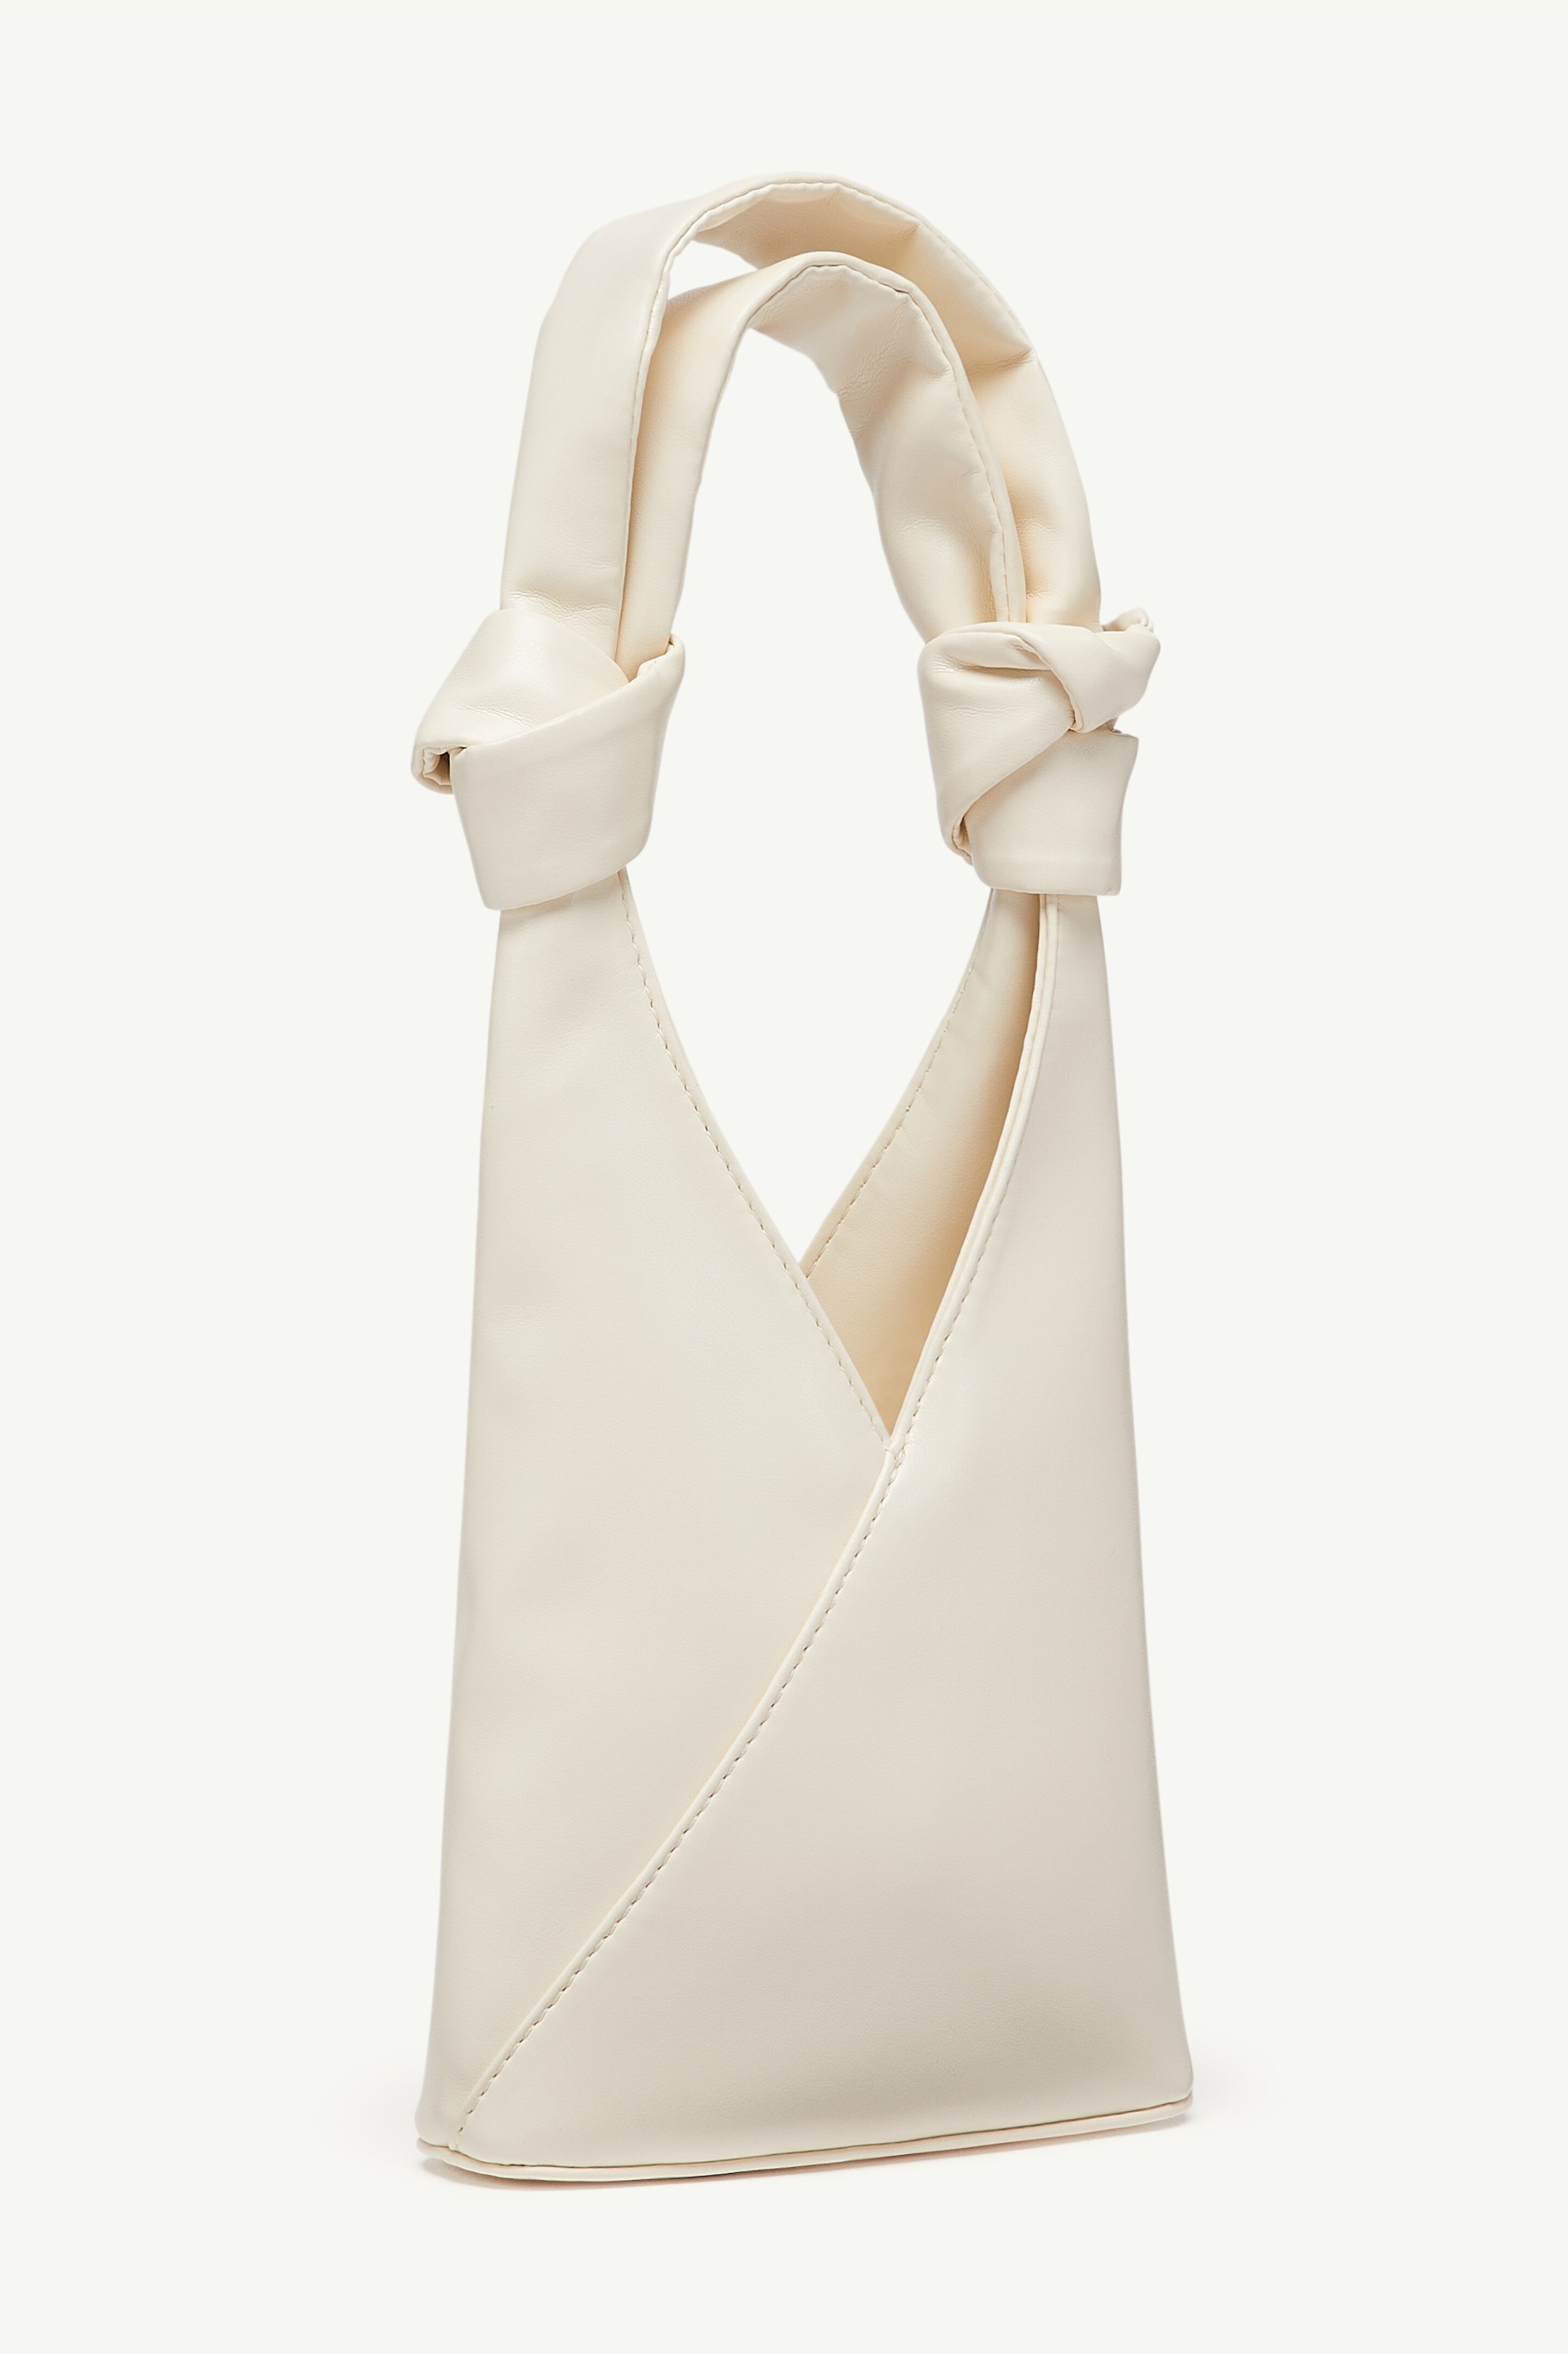 Japanese knotted bag - 2